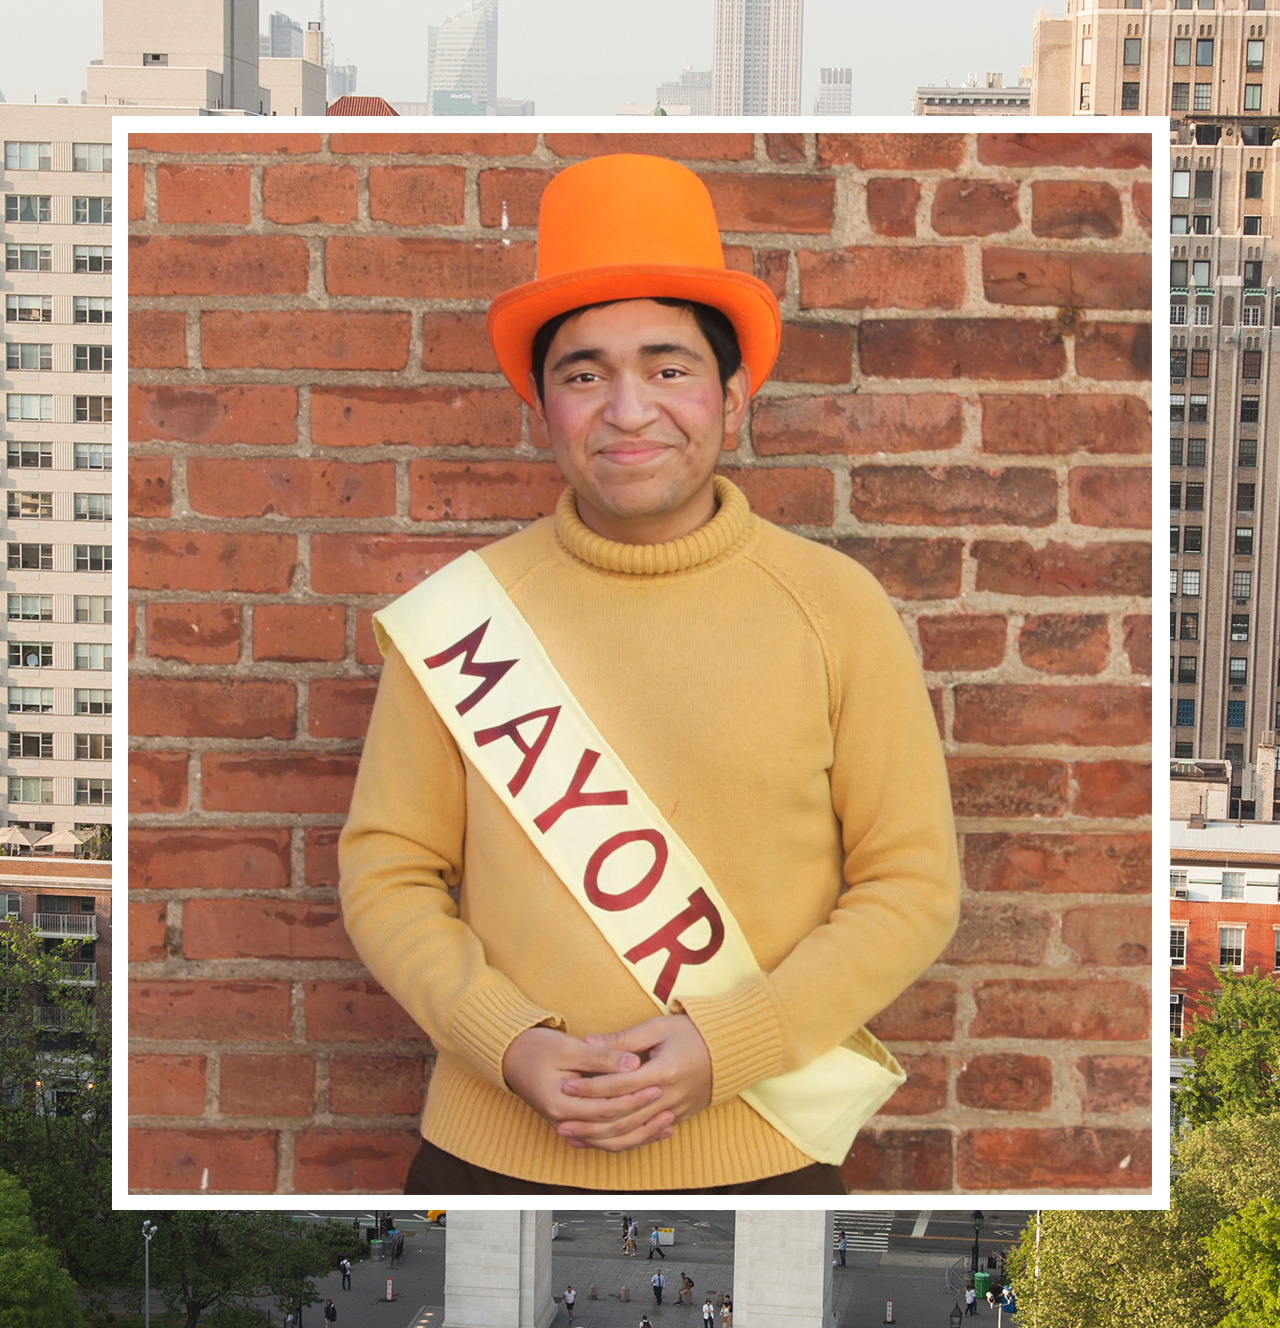 Kevin Paredes dressed as a character from Seussical: The Musical